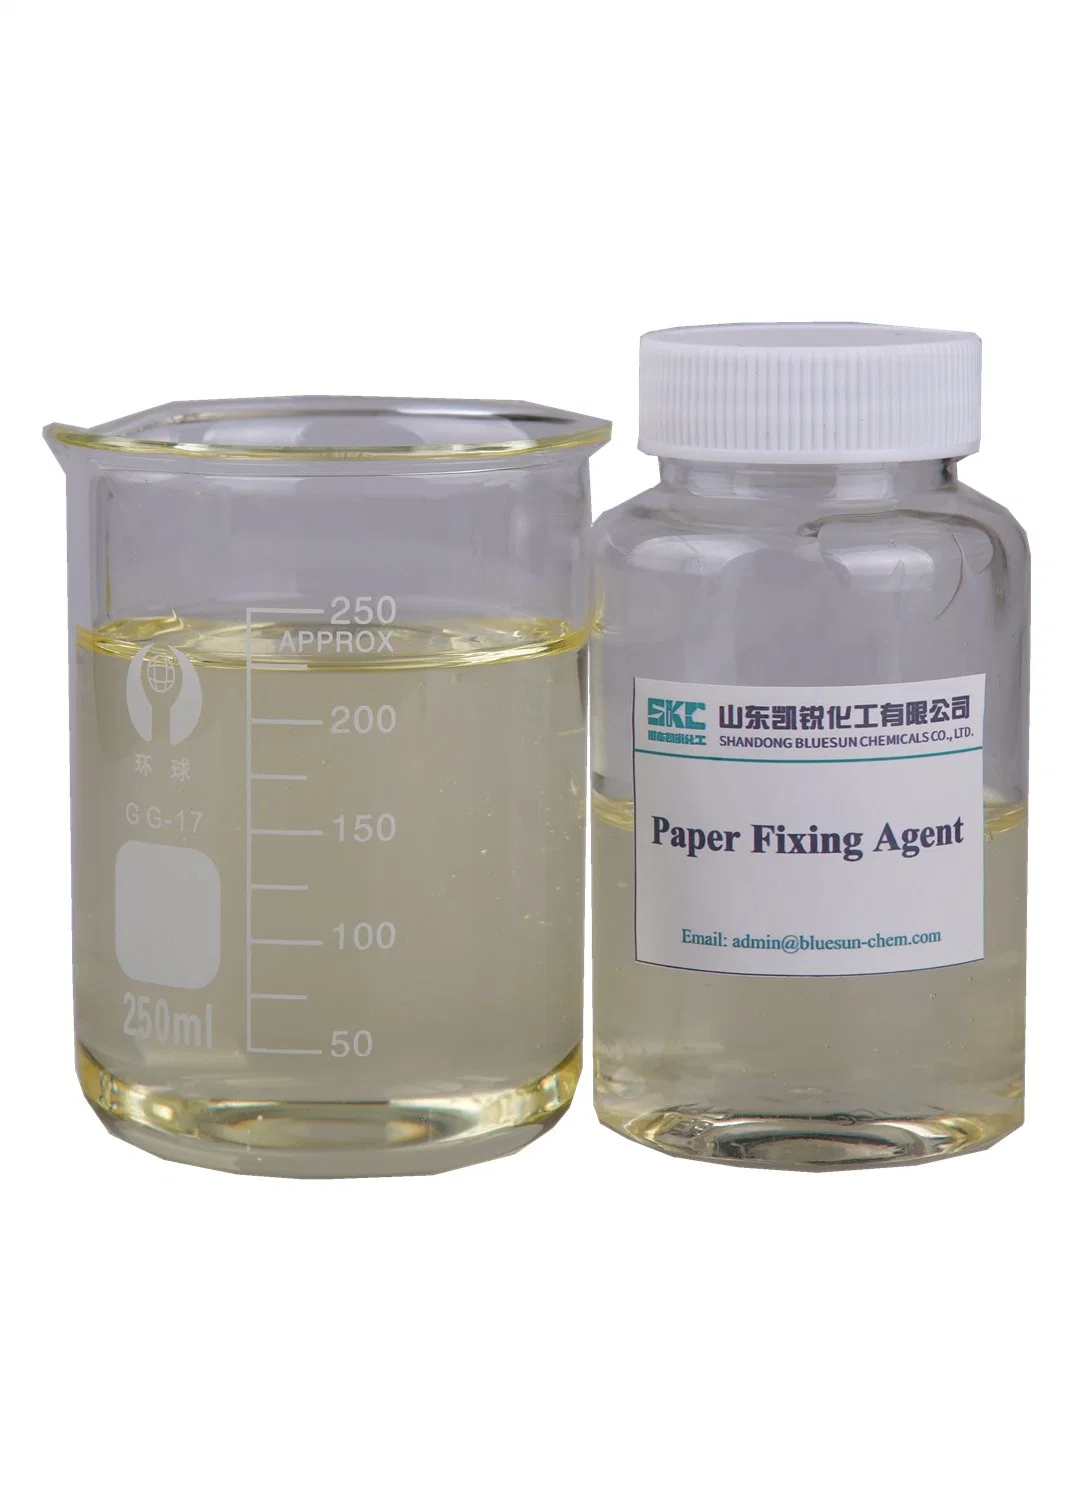 Free Color and Cross Linking Fixing Agent for Reactive Dyes